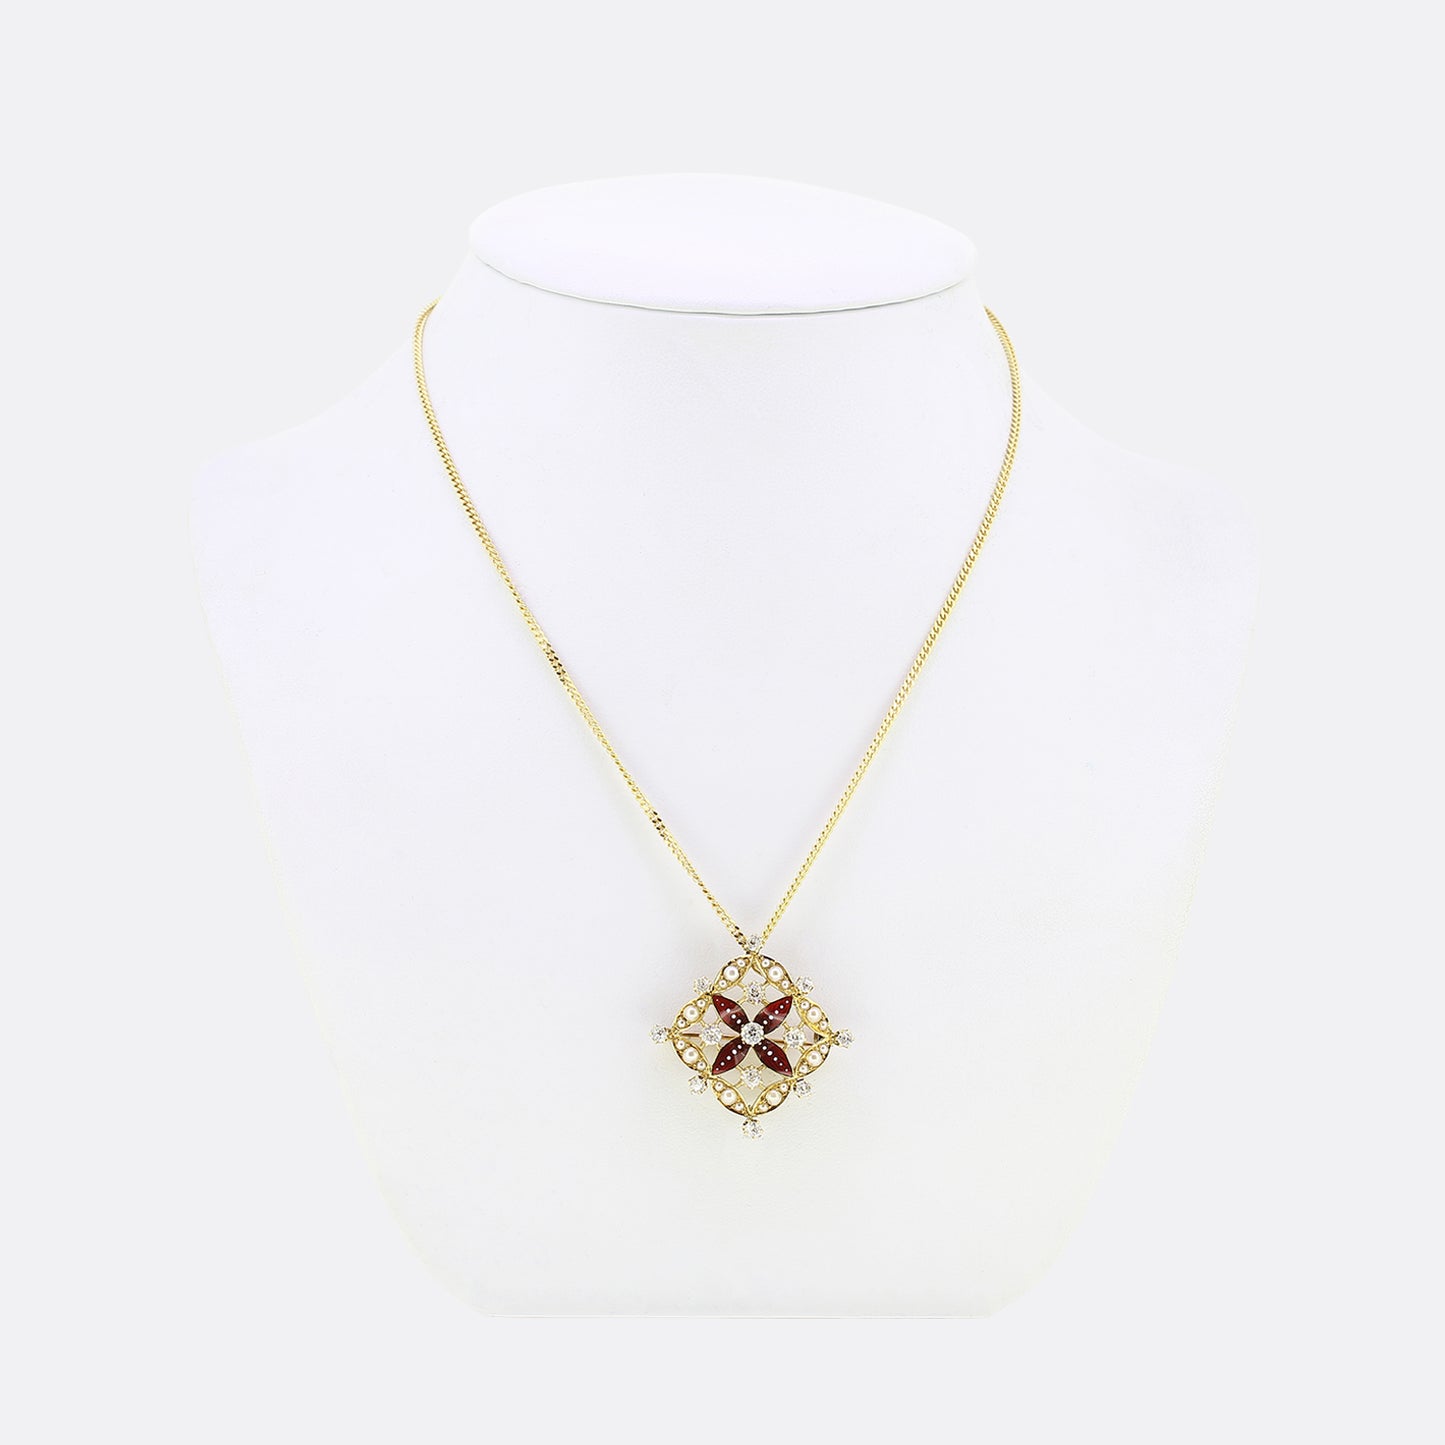 Victorian Enamel Diamond and Pearl Flower Necklace